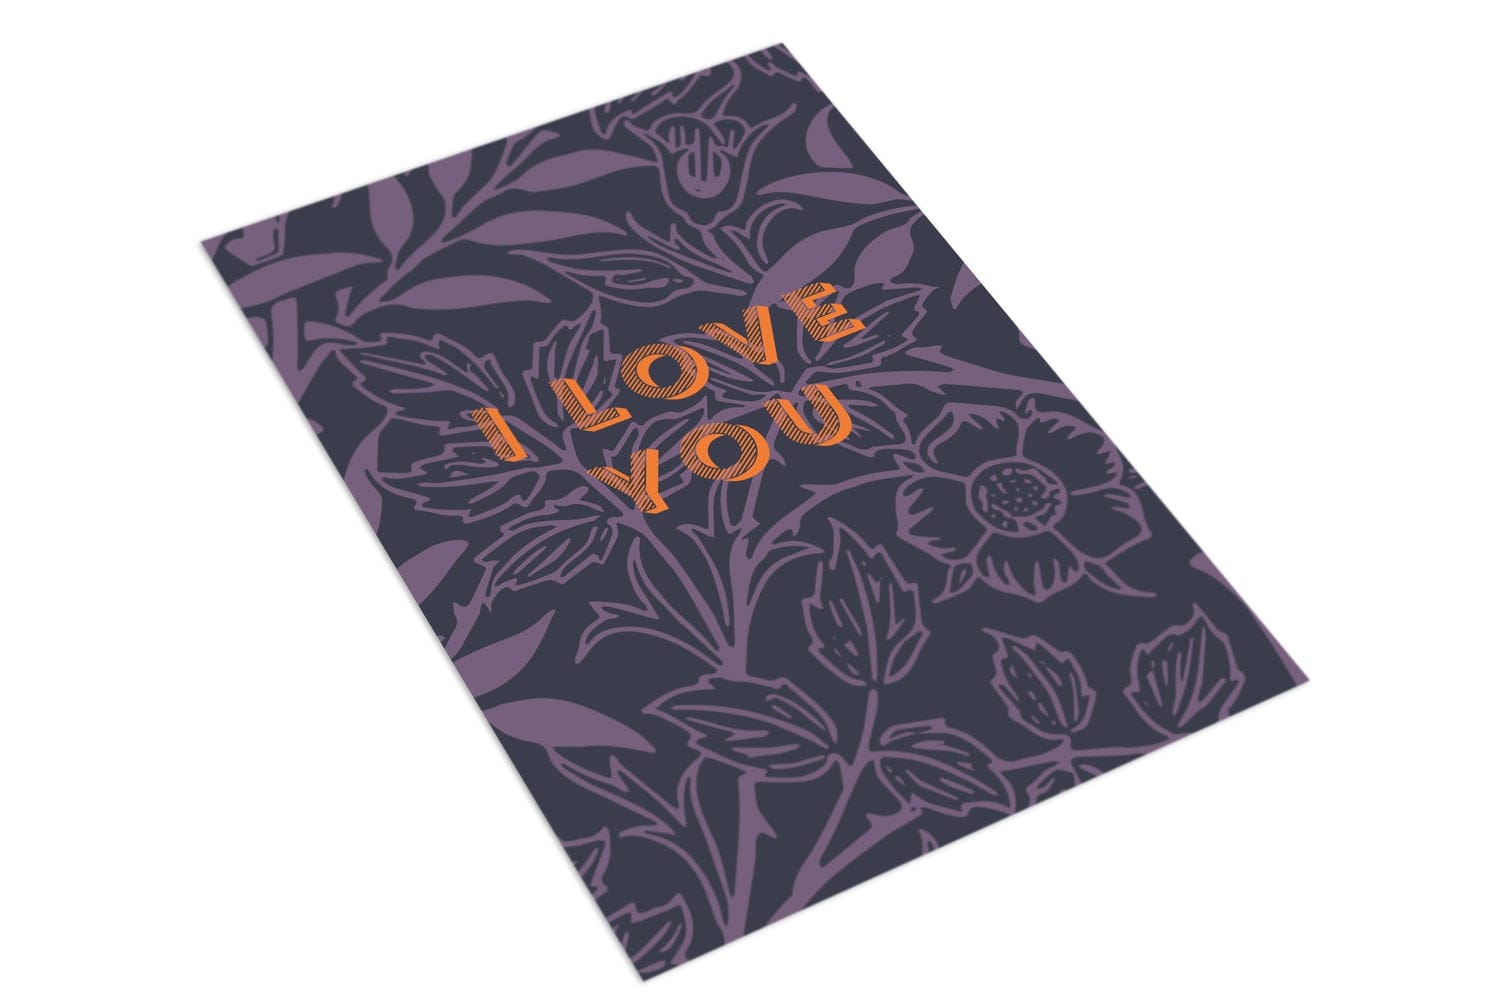 I Love You Flowers - The Paper People Greeting Cards